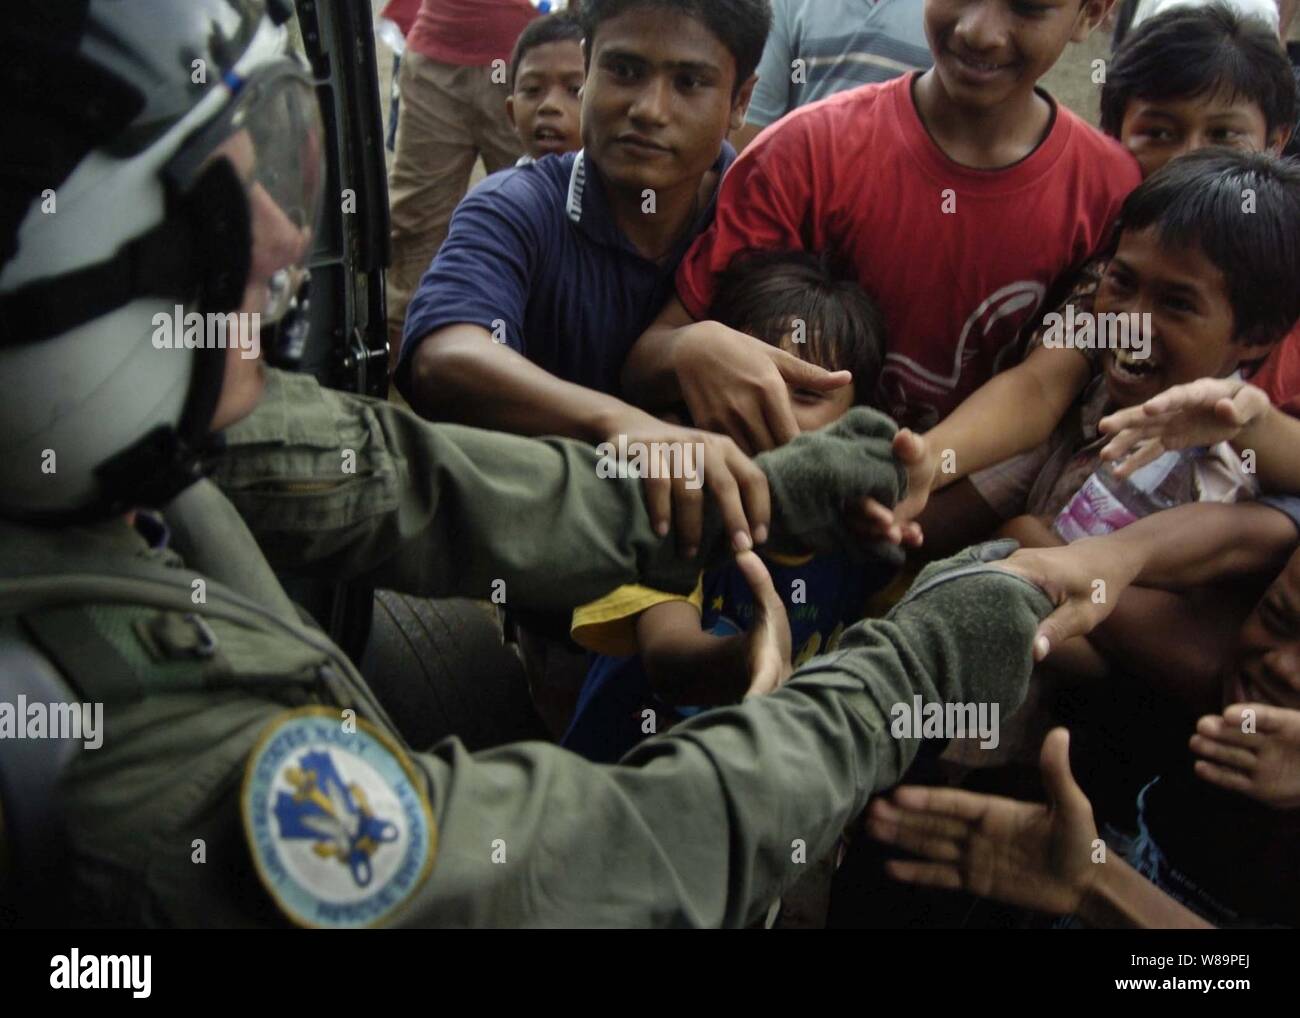 A U.S. Navy aircrewman assigned to Helicopter Anti-Submarine Squadron 2 shakes the hands of local citizens after delivering food and water to their village in Indonesia on Jan. 6, 2005.  The aircraft carrier USS Abraham Lincoln (CVN 72) and its embarked Carrier Air Wing Two 2 are operating in the Indian Ocean off the coasts of Indonesia and Thailand in support of Operation Unified Assistance. Stock Photo